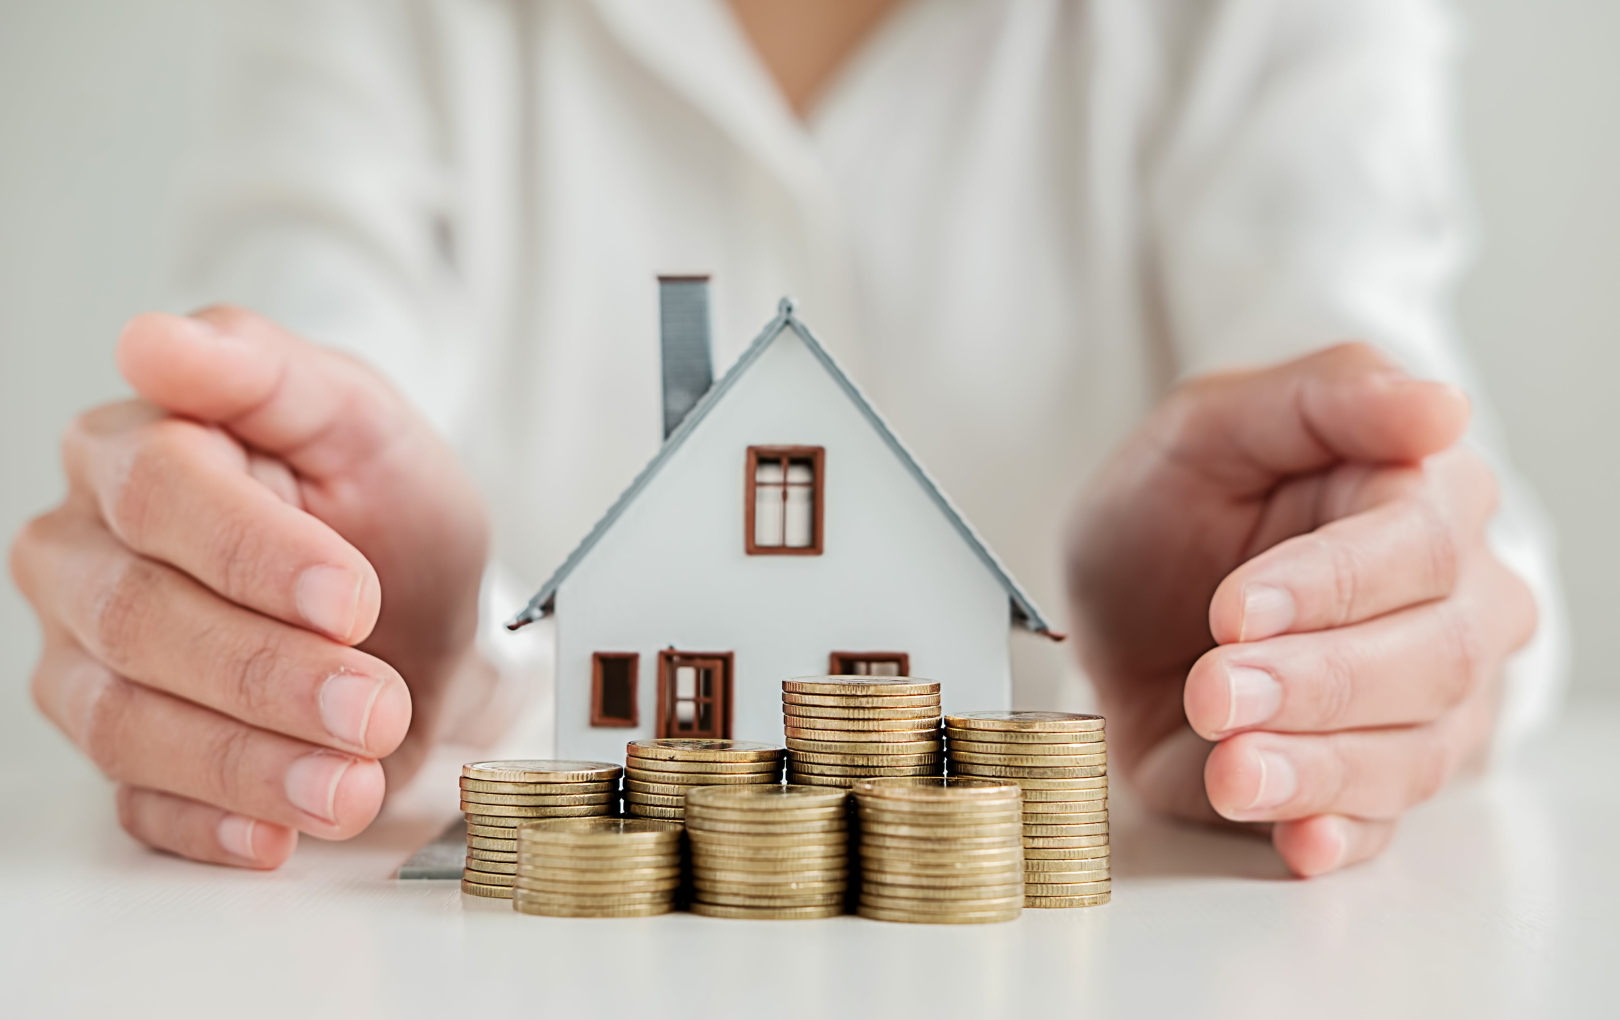 save money for a home downpayment for your new home